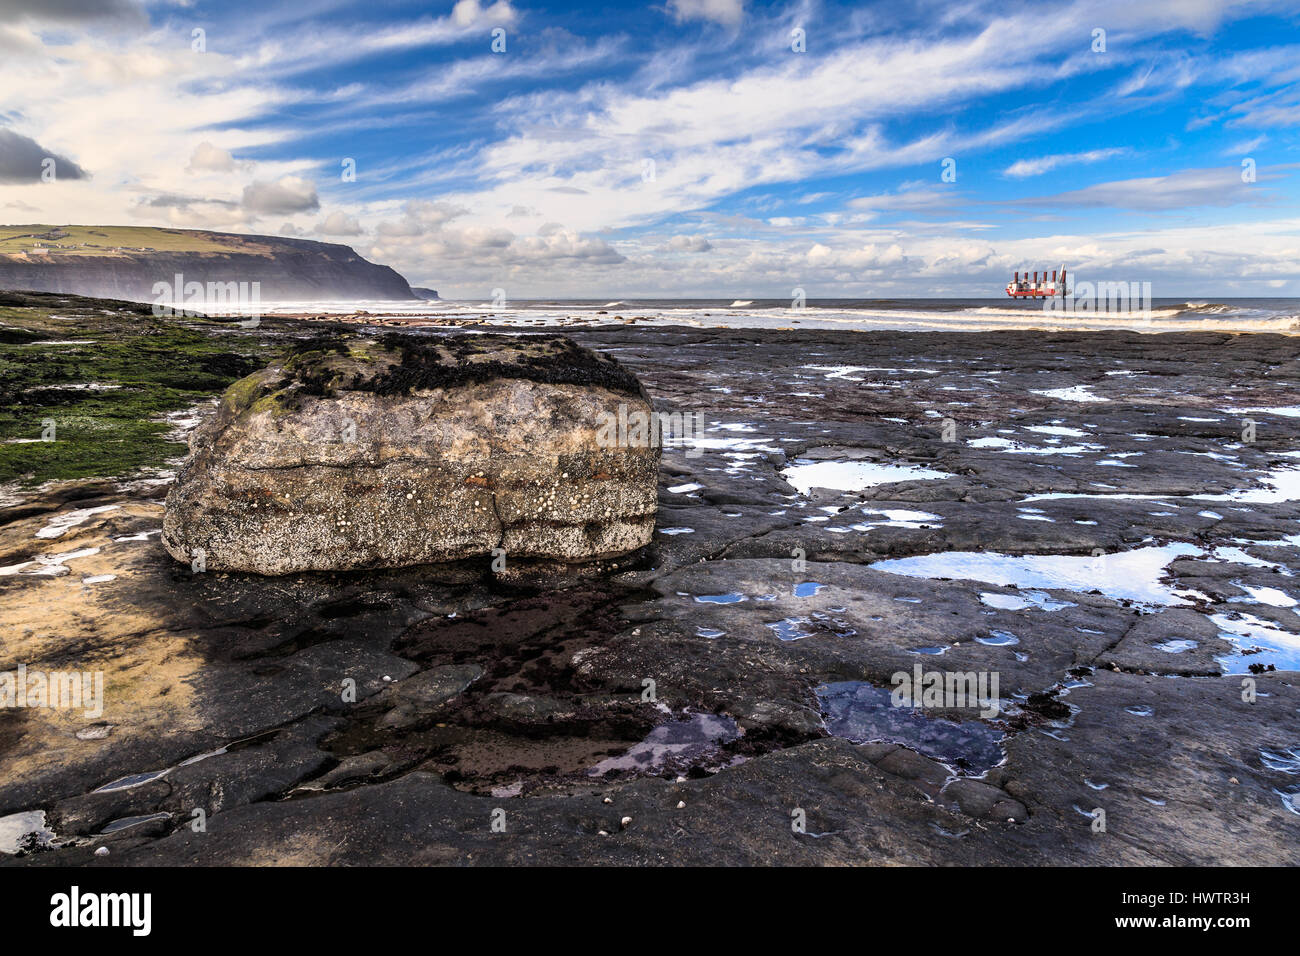 STAITHES, ENGLAND - MARCH 1: Large rock and rock pools on Staithes beach, North Yorkshire. In Staithes, North Yorkshire, England. On 1st March 2017. Stock Photo